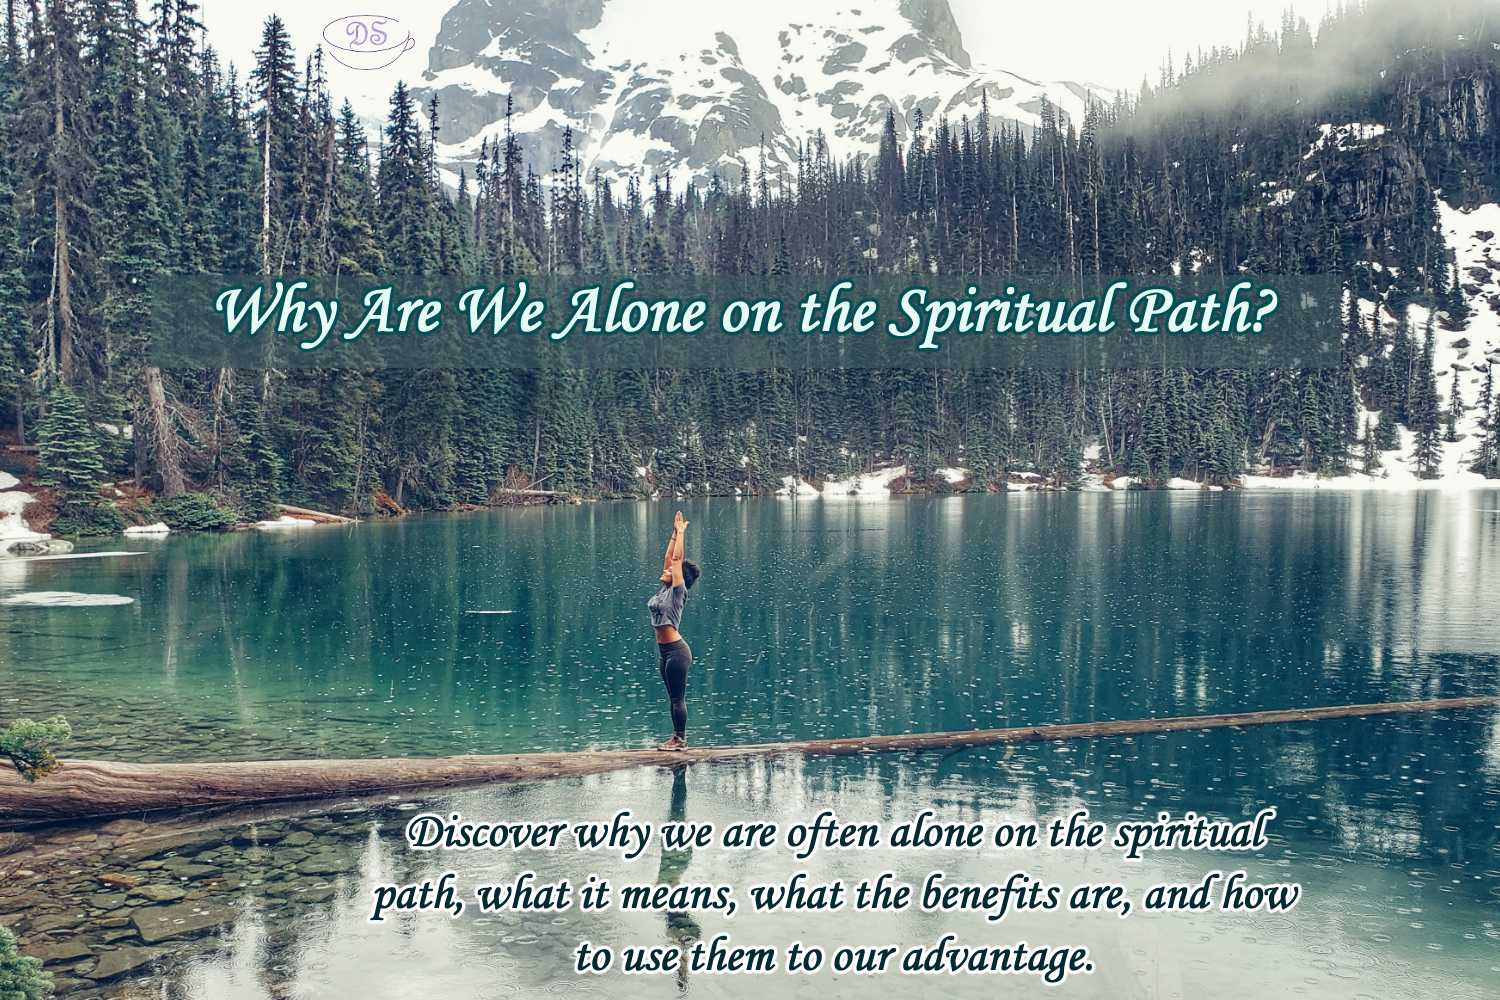 Being Alone on the Spiritual Path